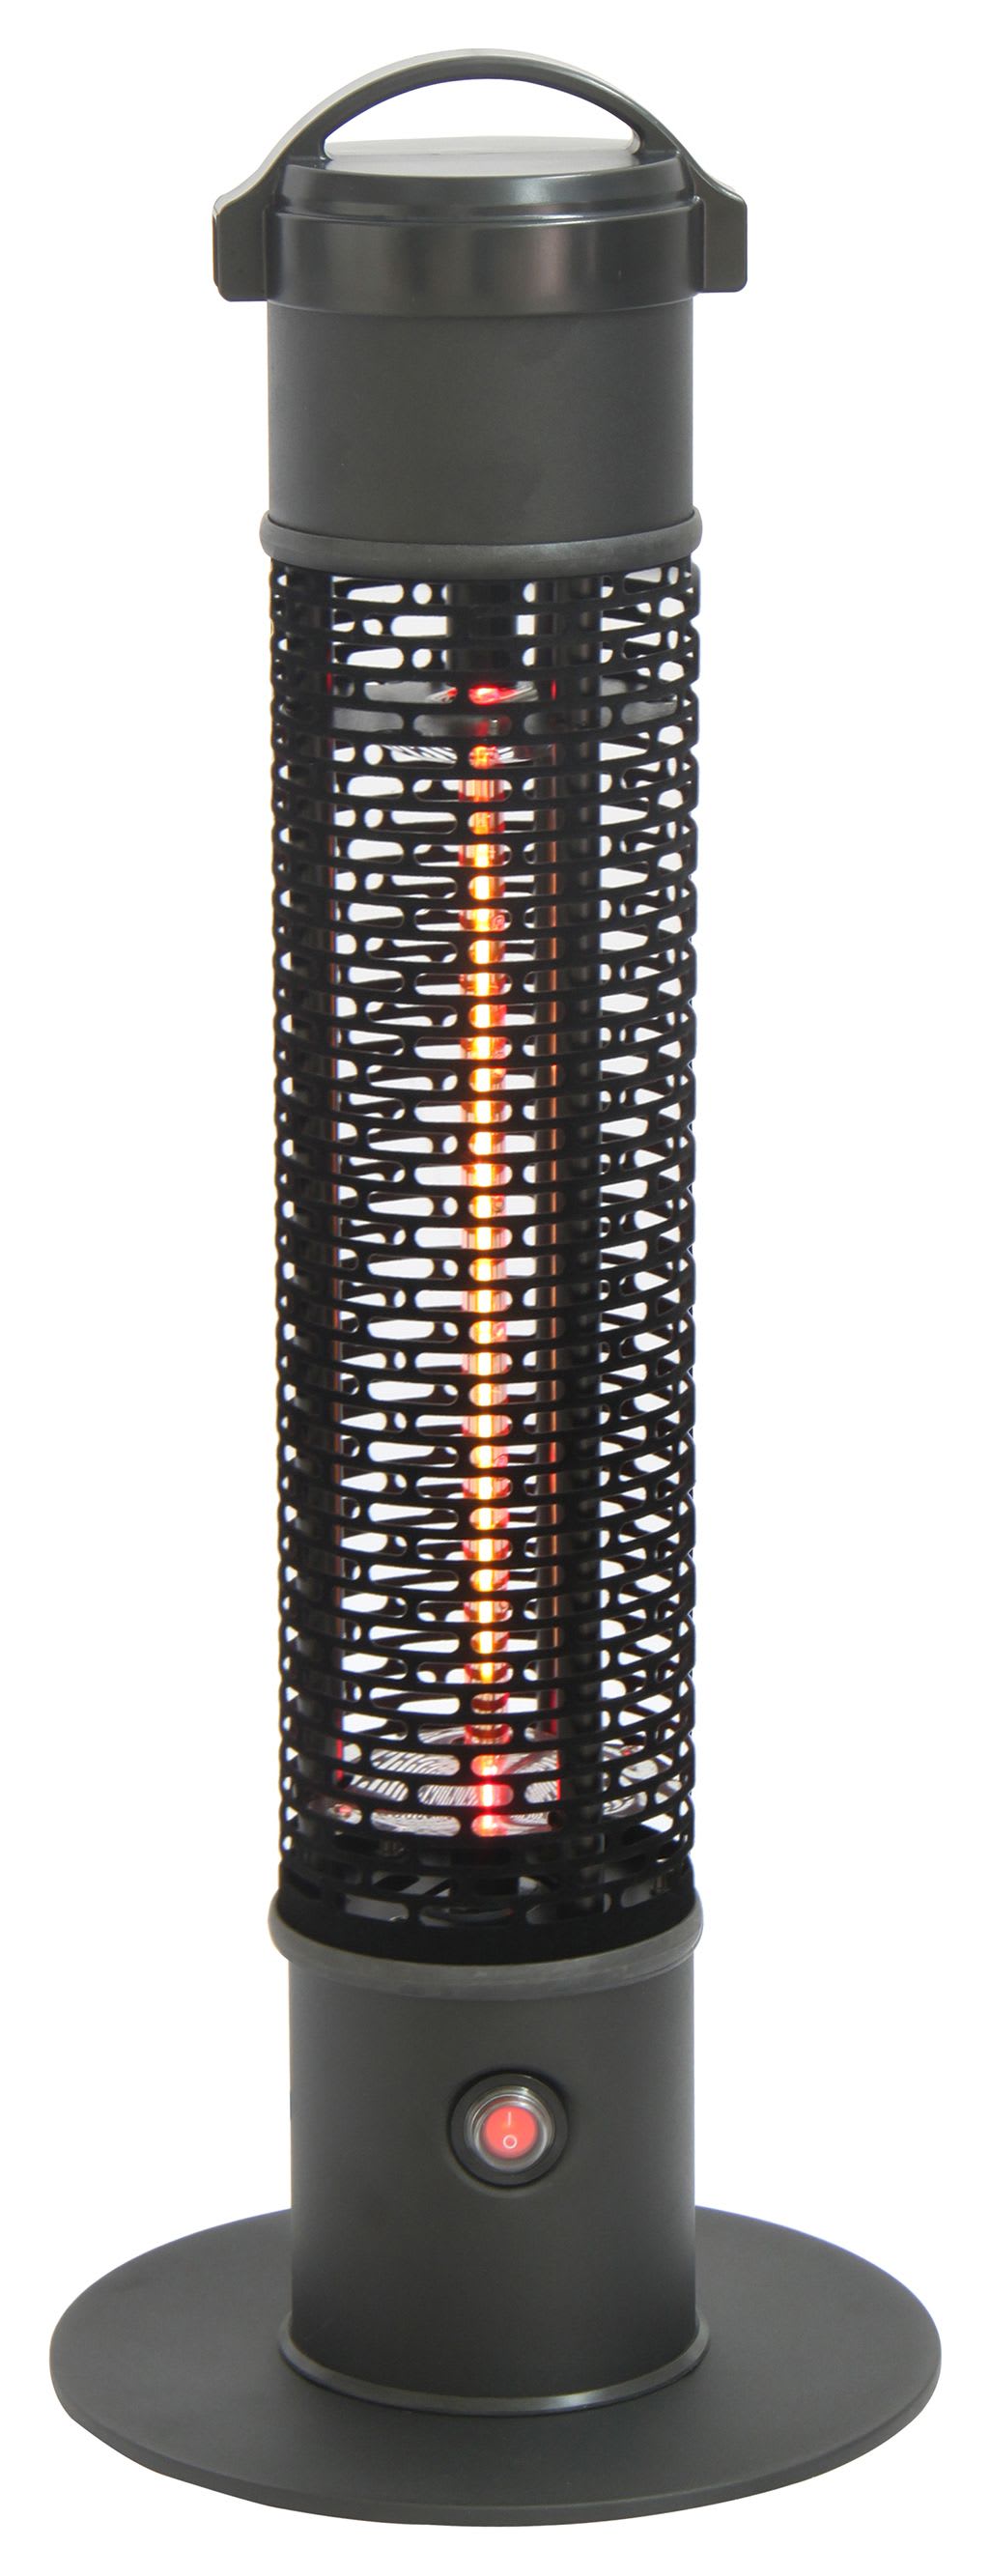 Charles Bentley 1200W Electric Outdoor Tower Patio Heater